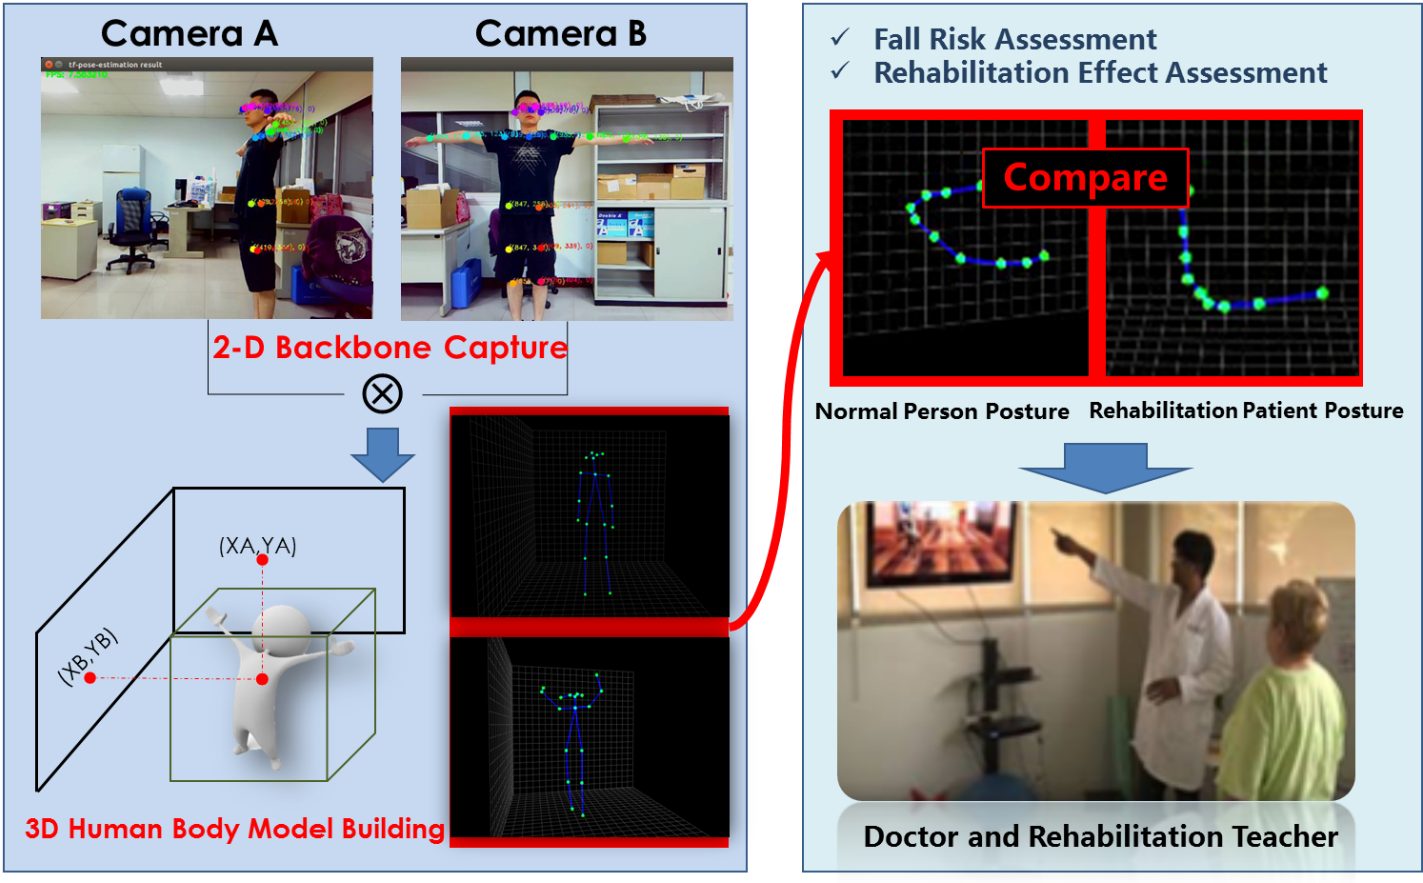 Development of an AI-based 3D Human Posture Capture and Tracking System for Fall Risk and Rehabilitation Effect Assessments.